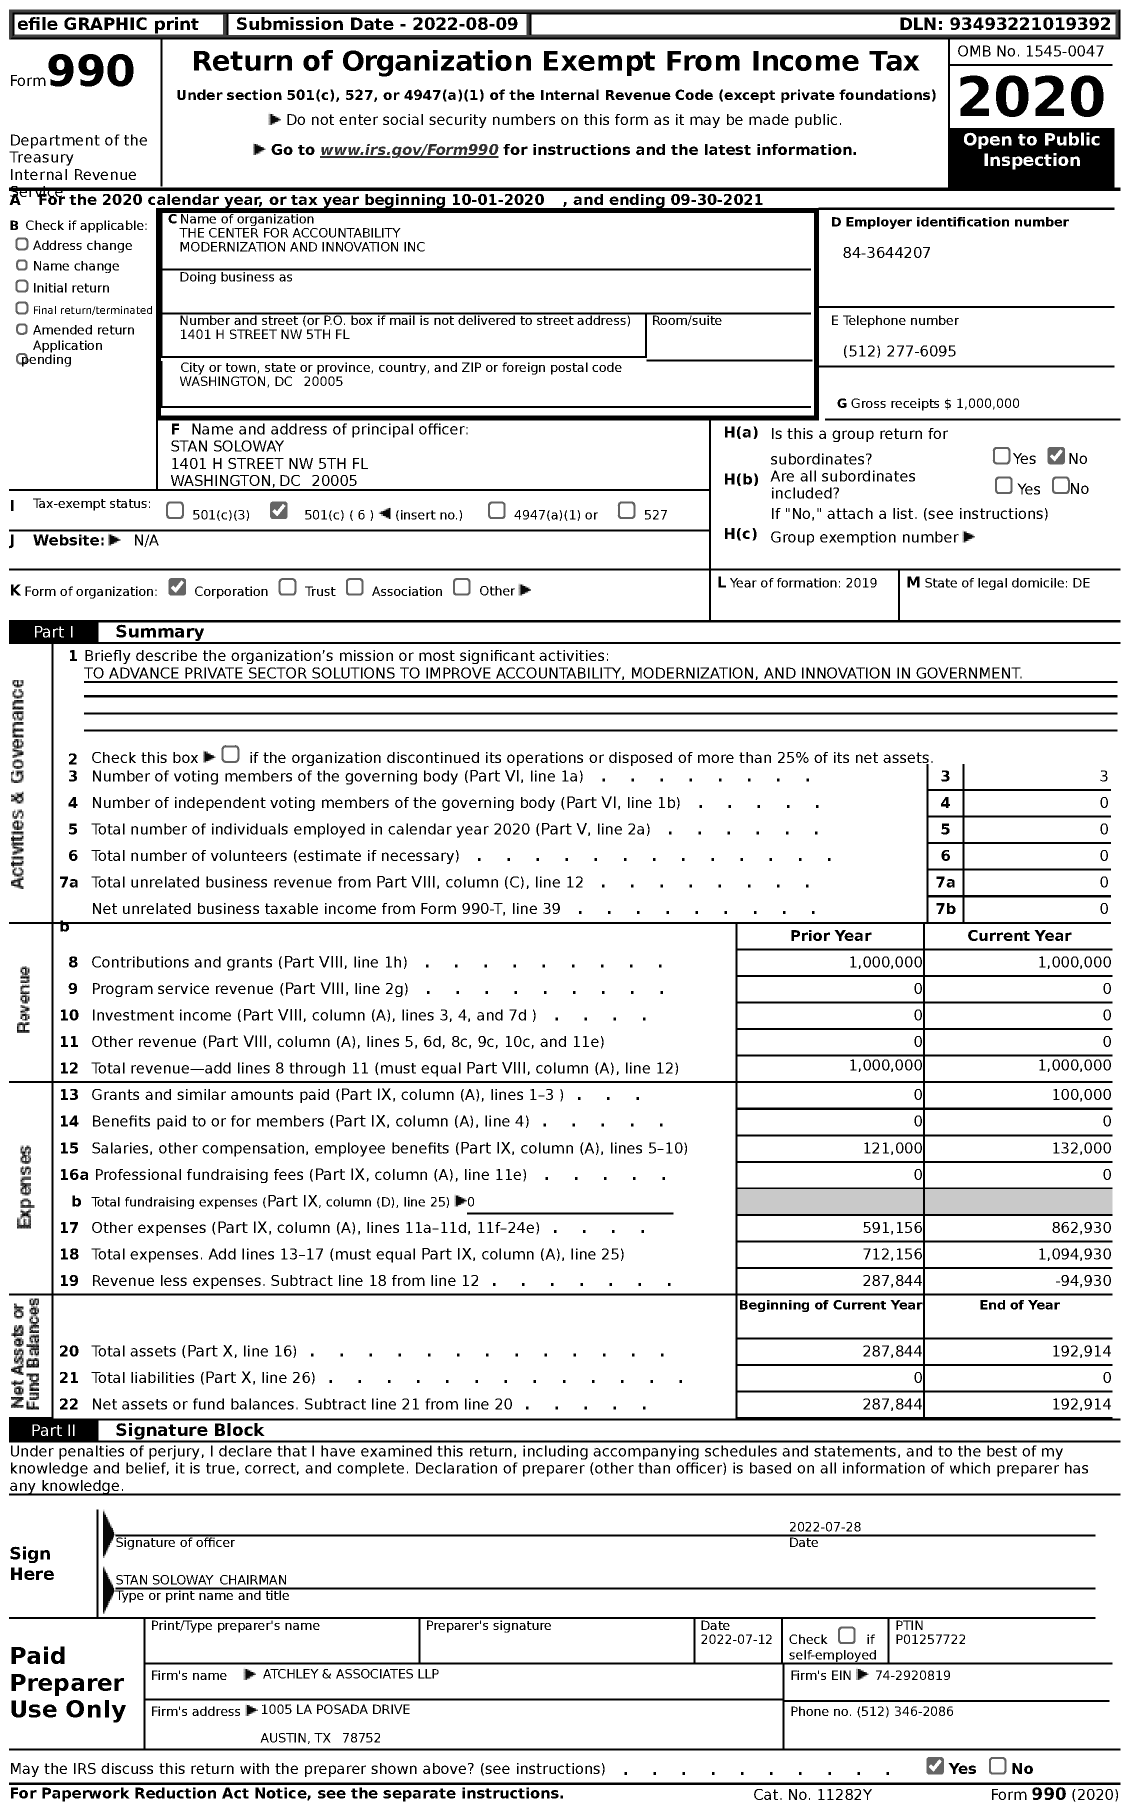 Image of first page of 2020 Form 990 for The Center for Accountability Modernization and Innovation